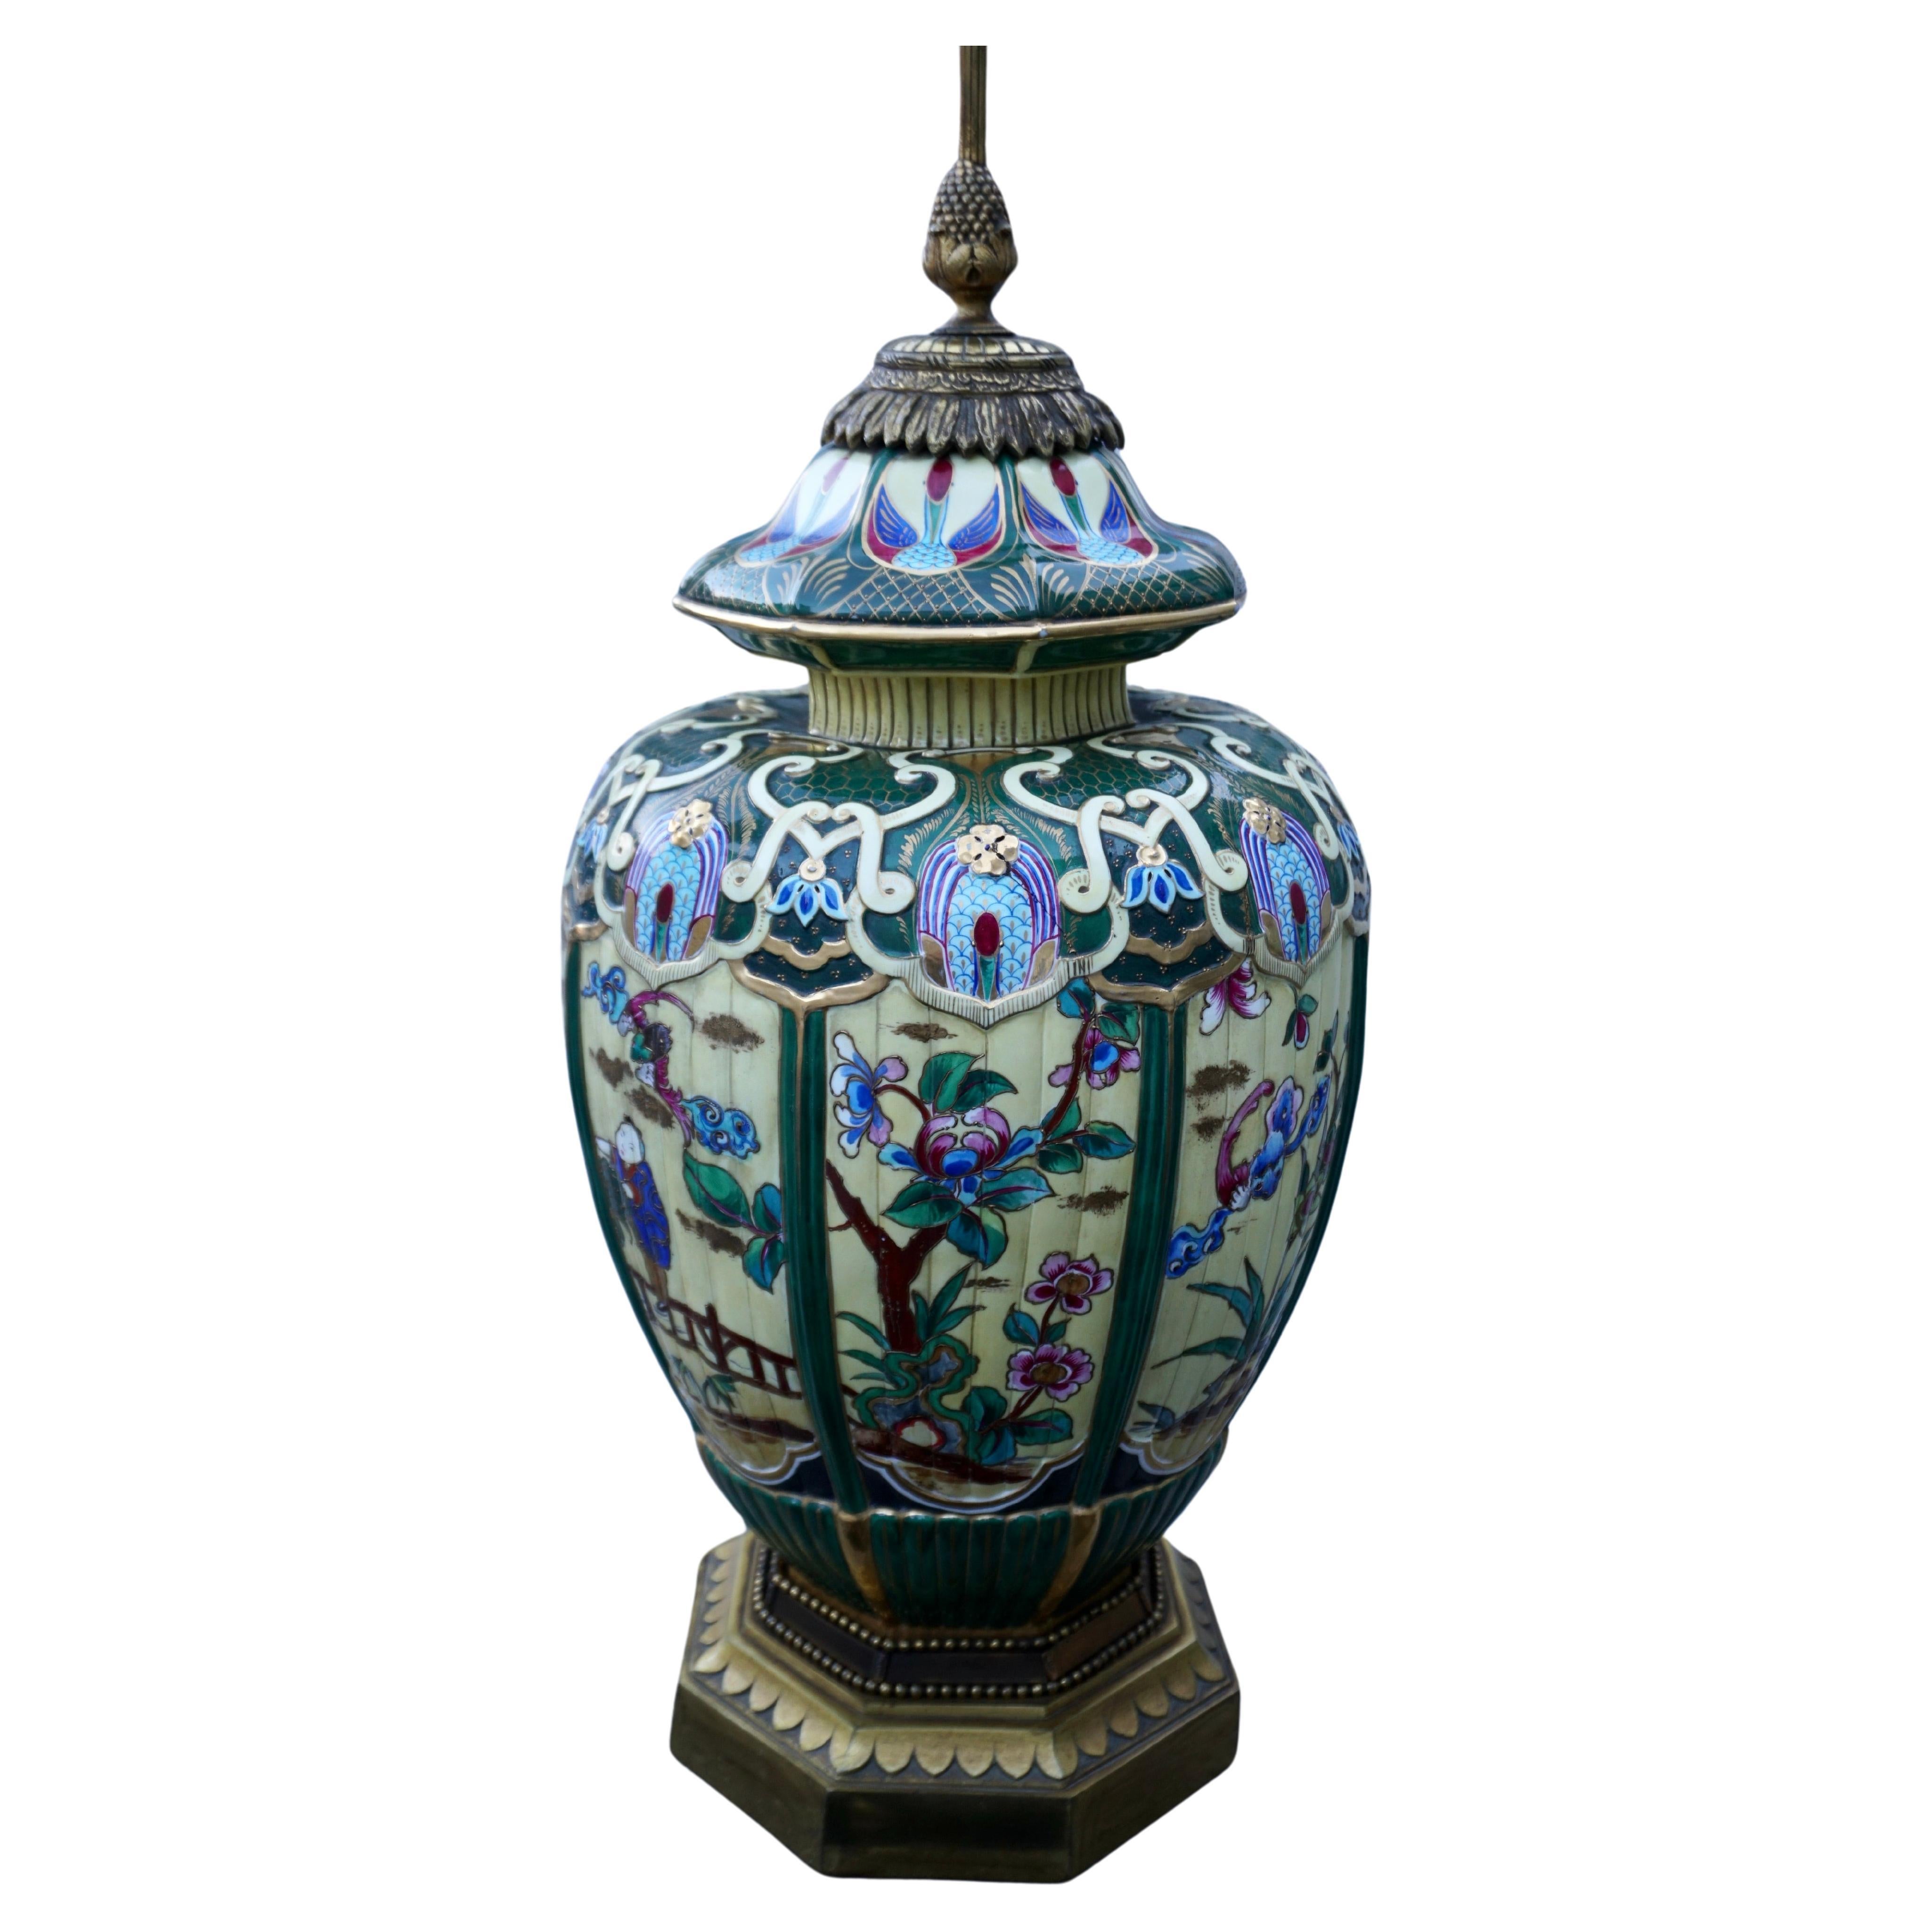 A Japanese hand painted earthenware vase mounted as Lamp.

Of fluted ovoid form painted in imitation of cloisonné enamel with panels of figures and animals in a garden within fluted strapwork borders, mounted as a lamp base.

c. Late 19th or early